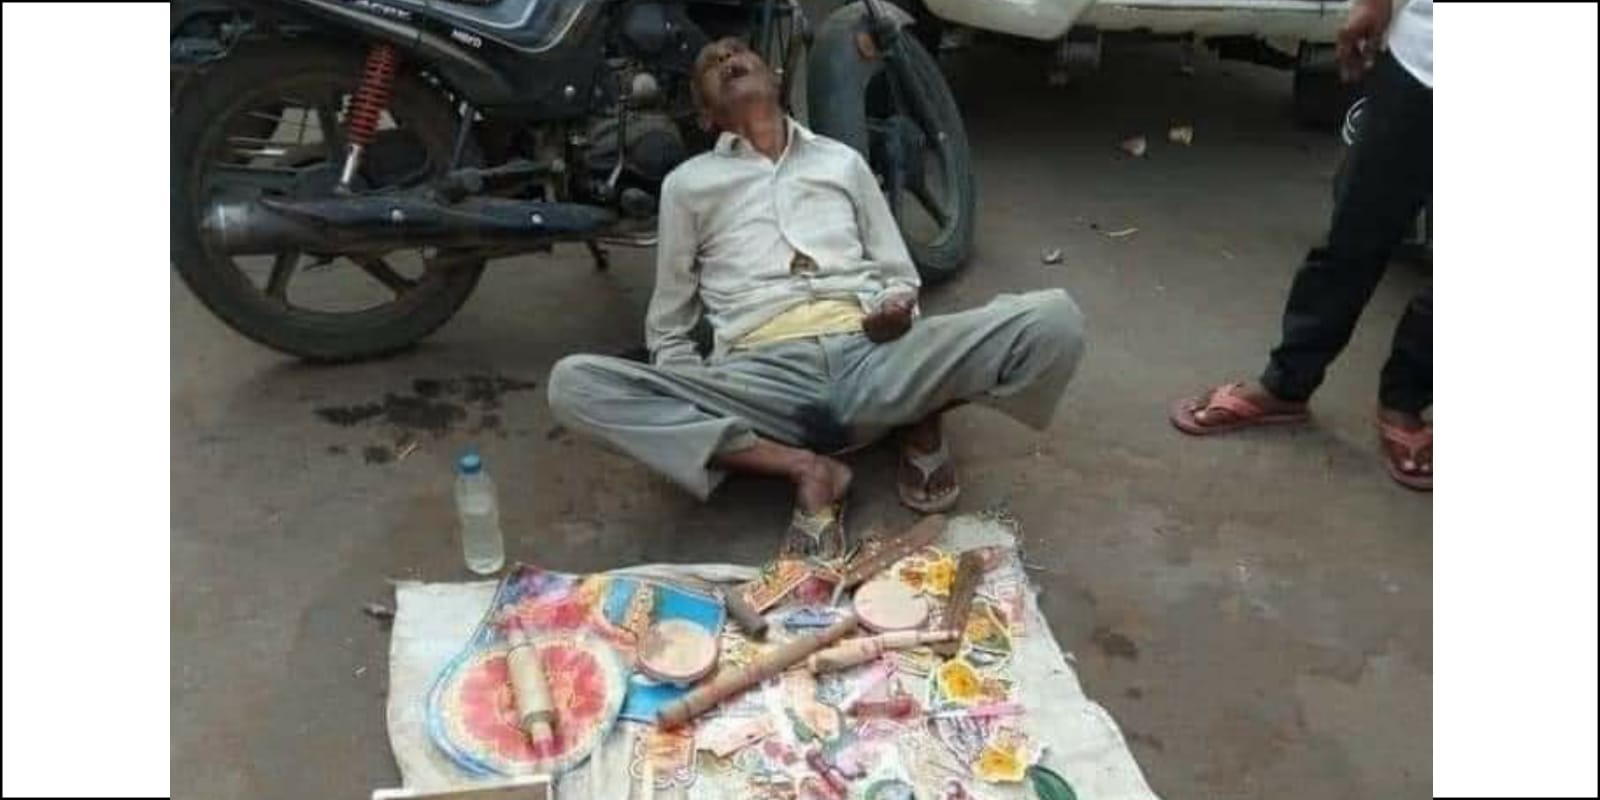 Full details of the Viral vendor who was found dead on roadside while selling stuff